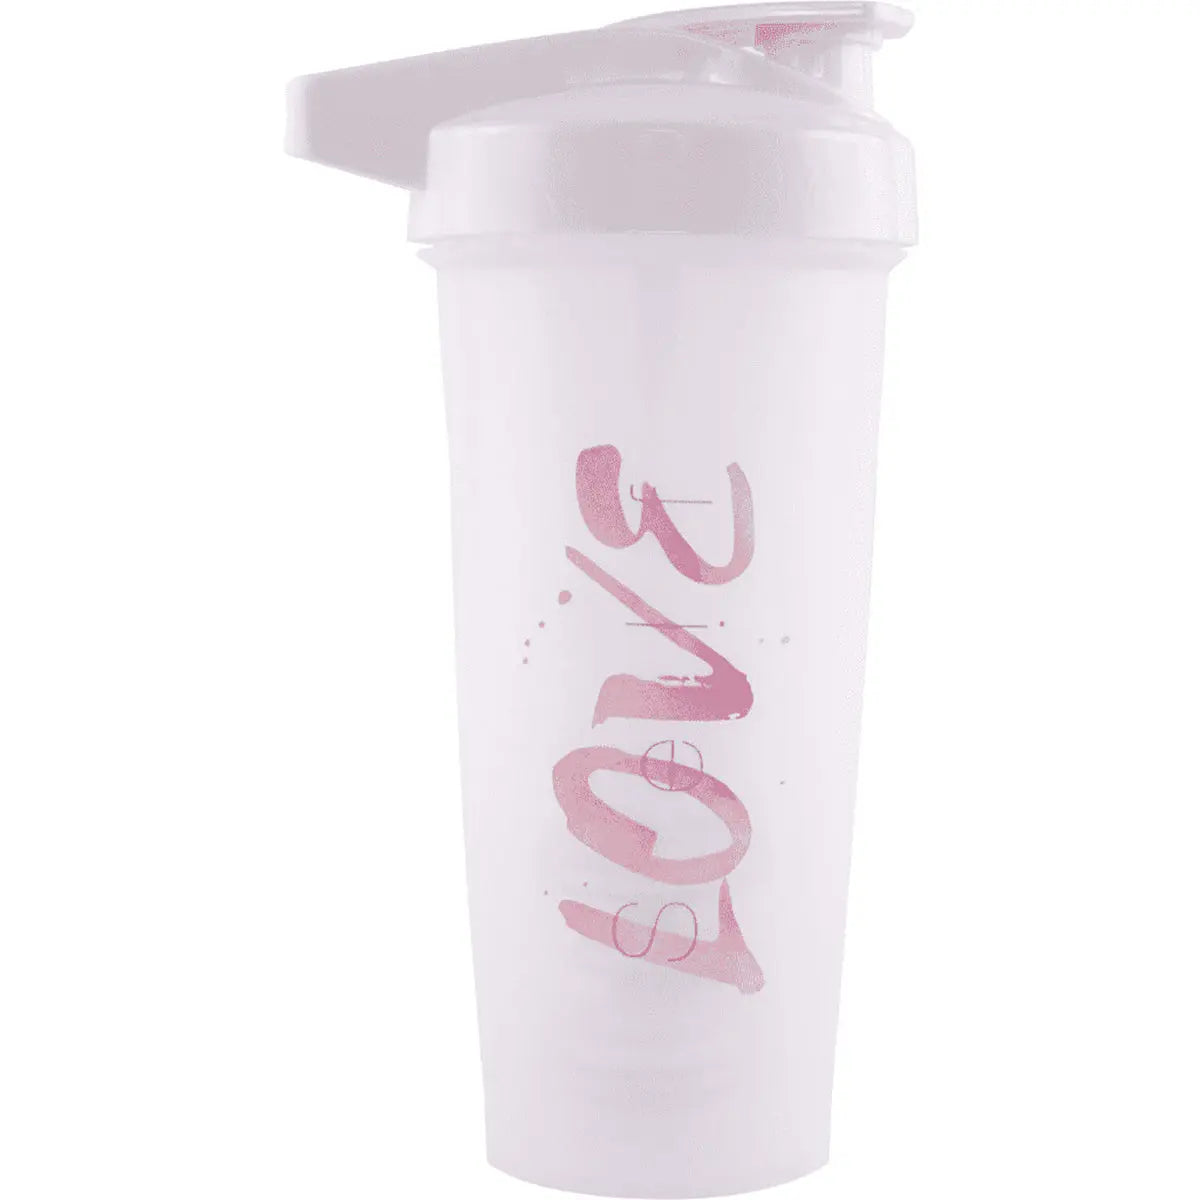 Performa Activ 28 oz. Shaker Cup Gym Bottle - Self-Love Performa